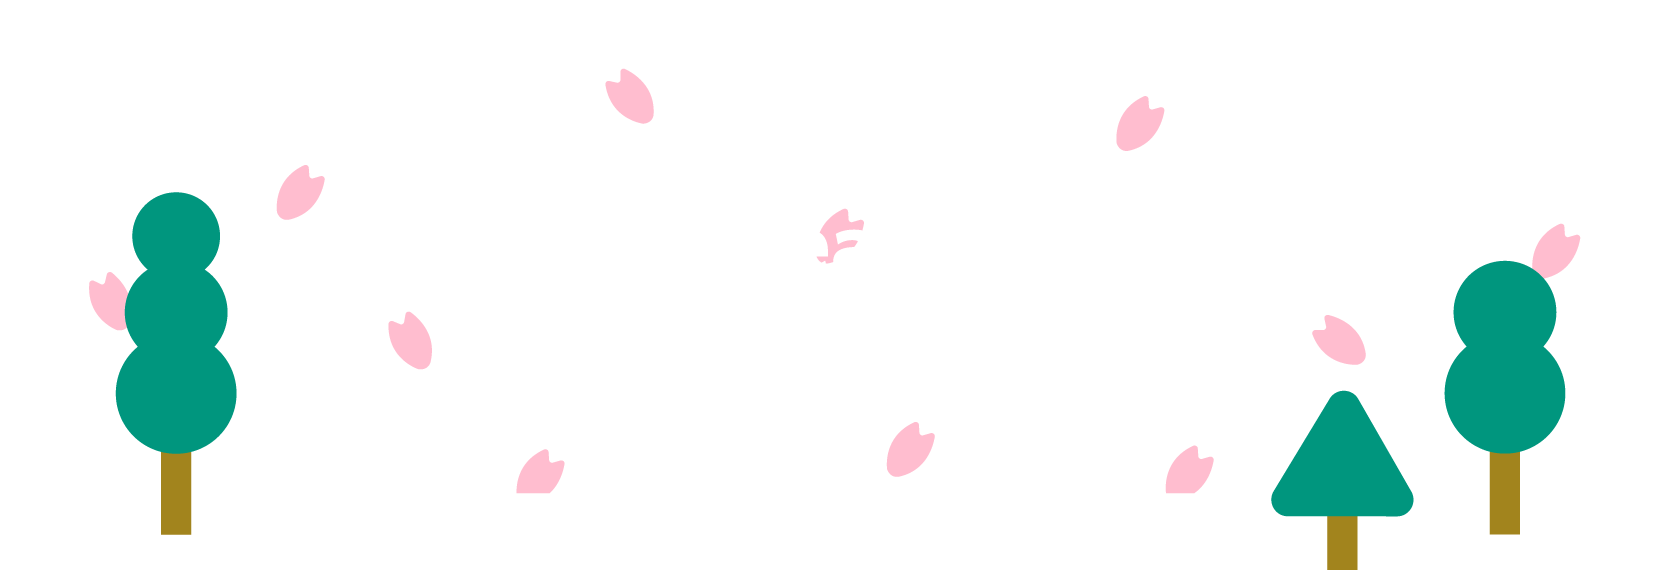 Our techo team tried out techo-decoration!